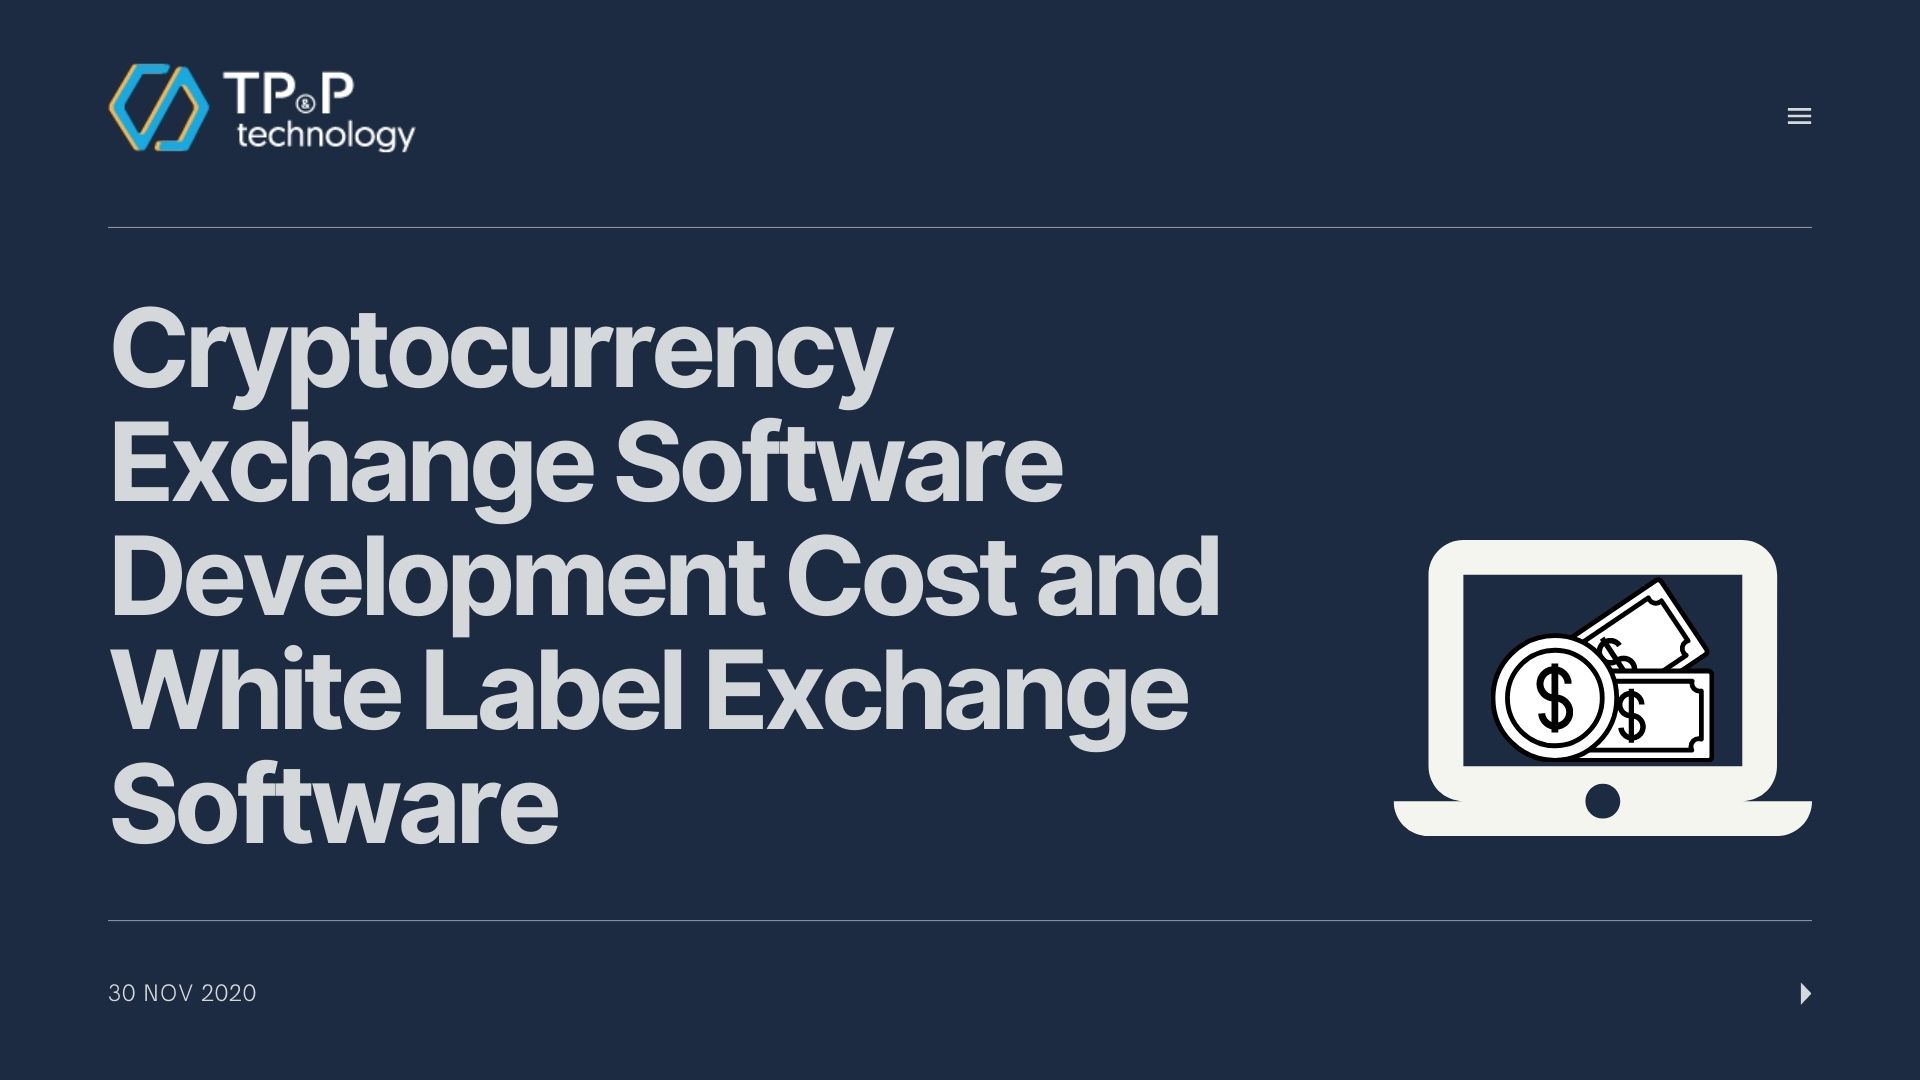 Cryptocurrency Exchange Software Development Cost and White Label Exchange Company